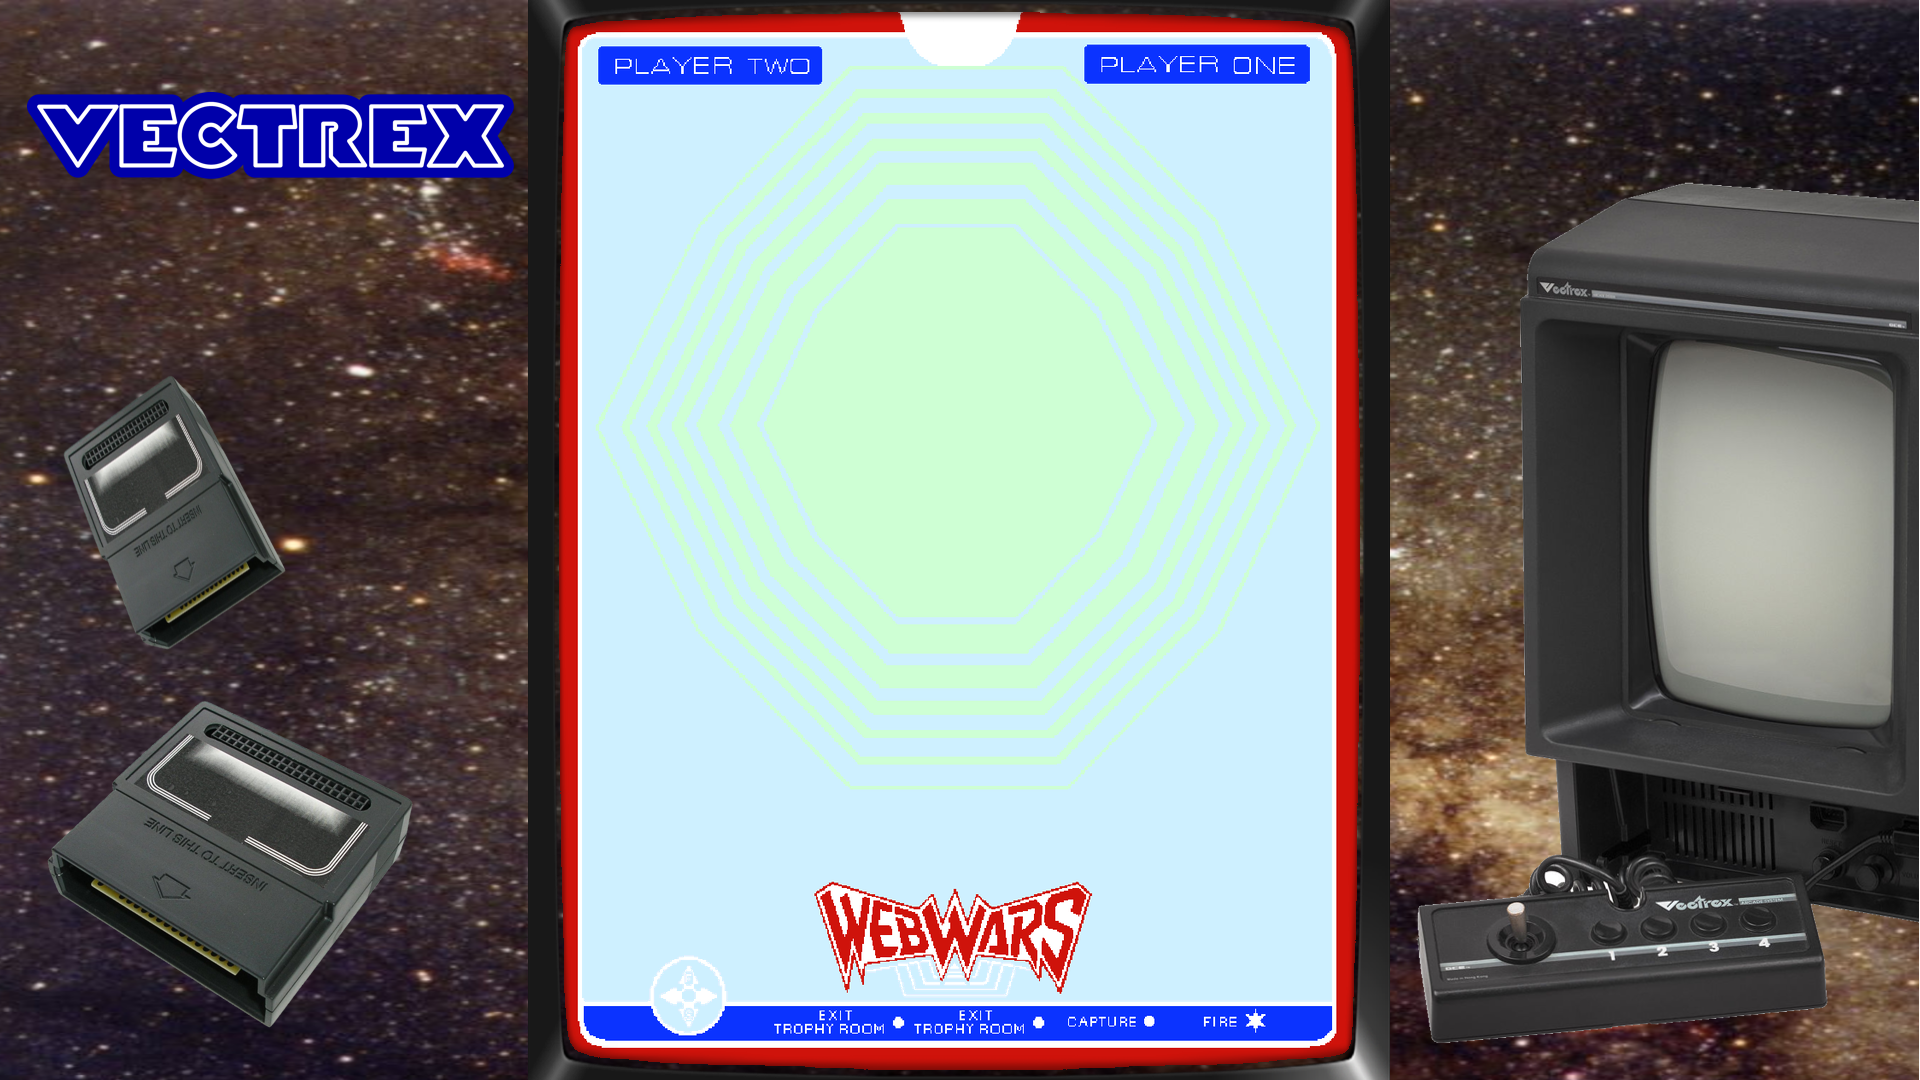 Vectrex Overlays for Retroarch (1920x1080) [includes transparencies]